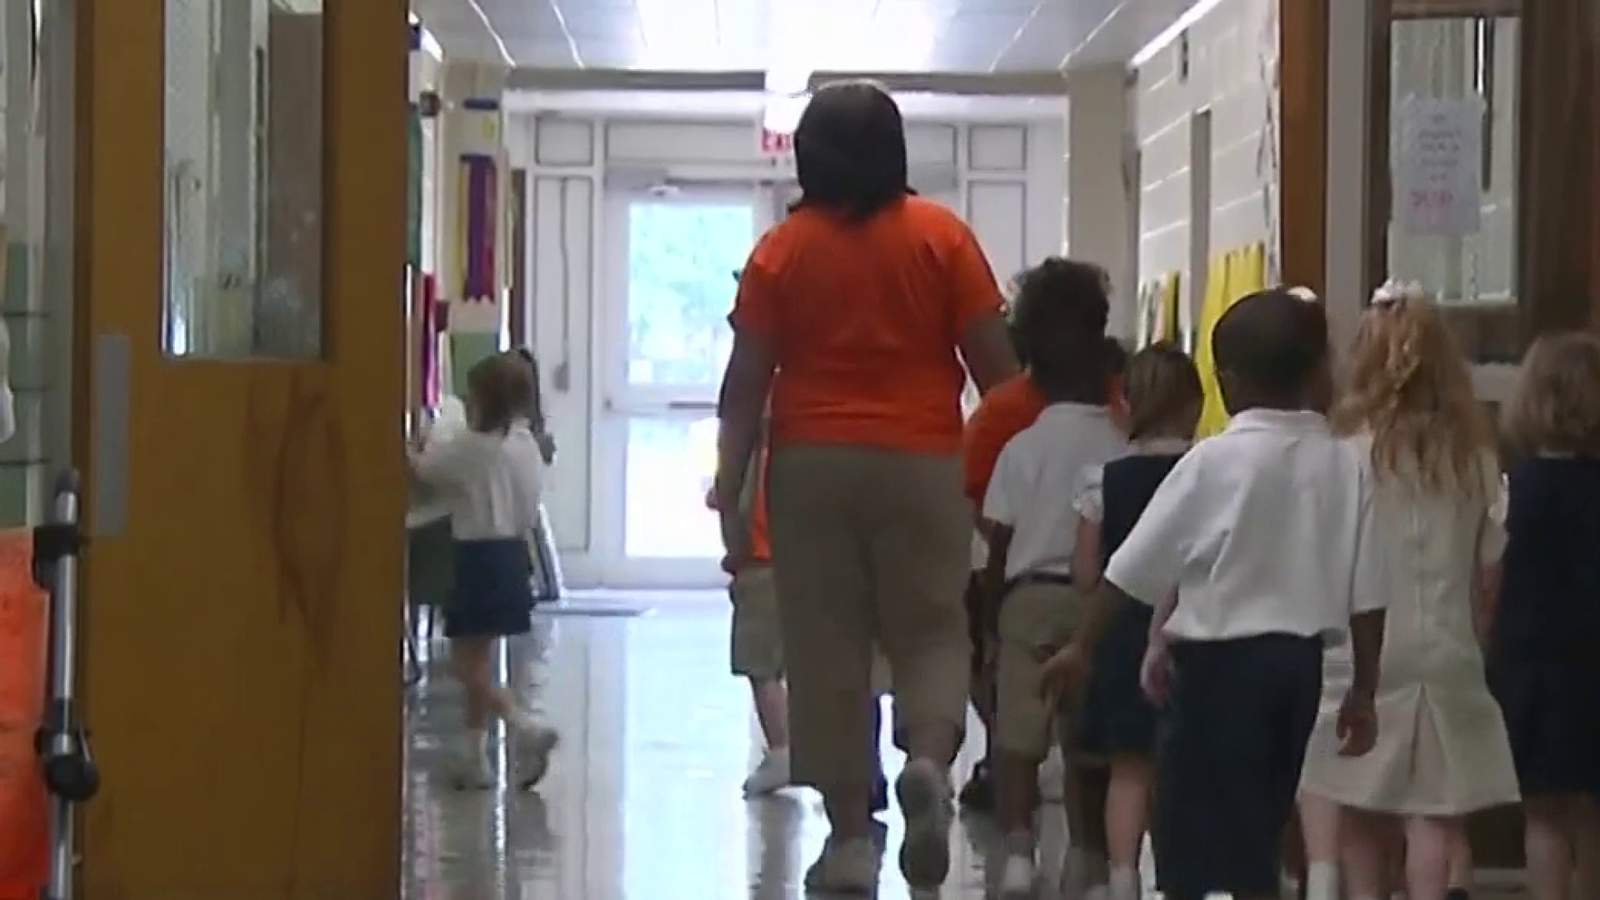 Local pediatricians weigh in on new CDC school guidelines